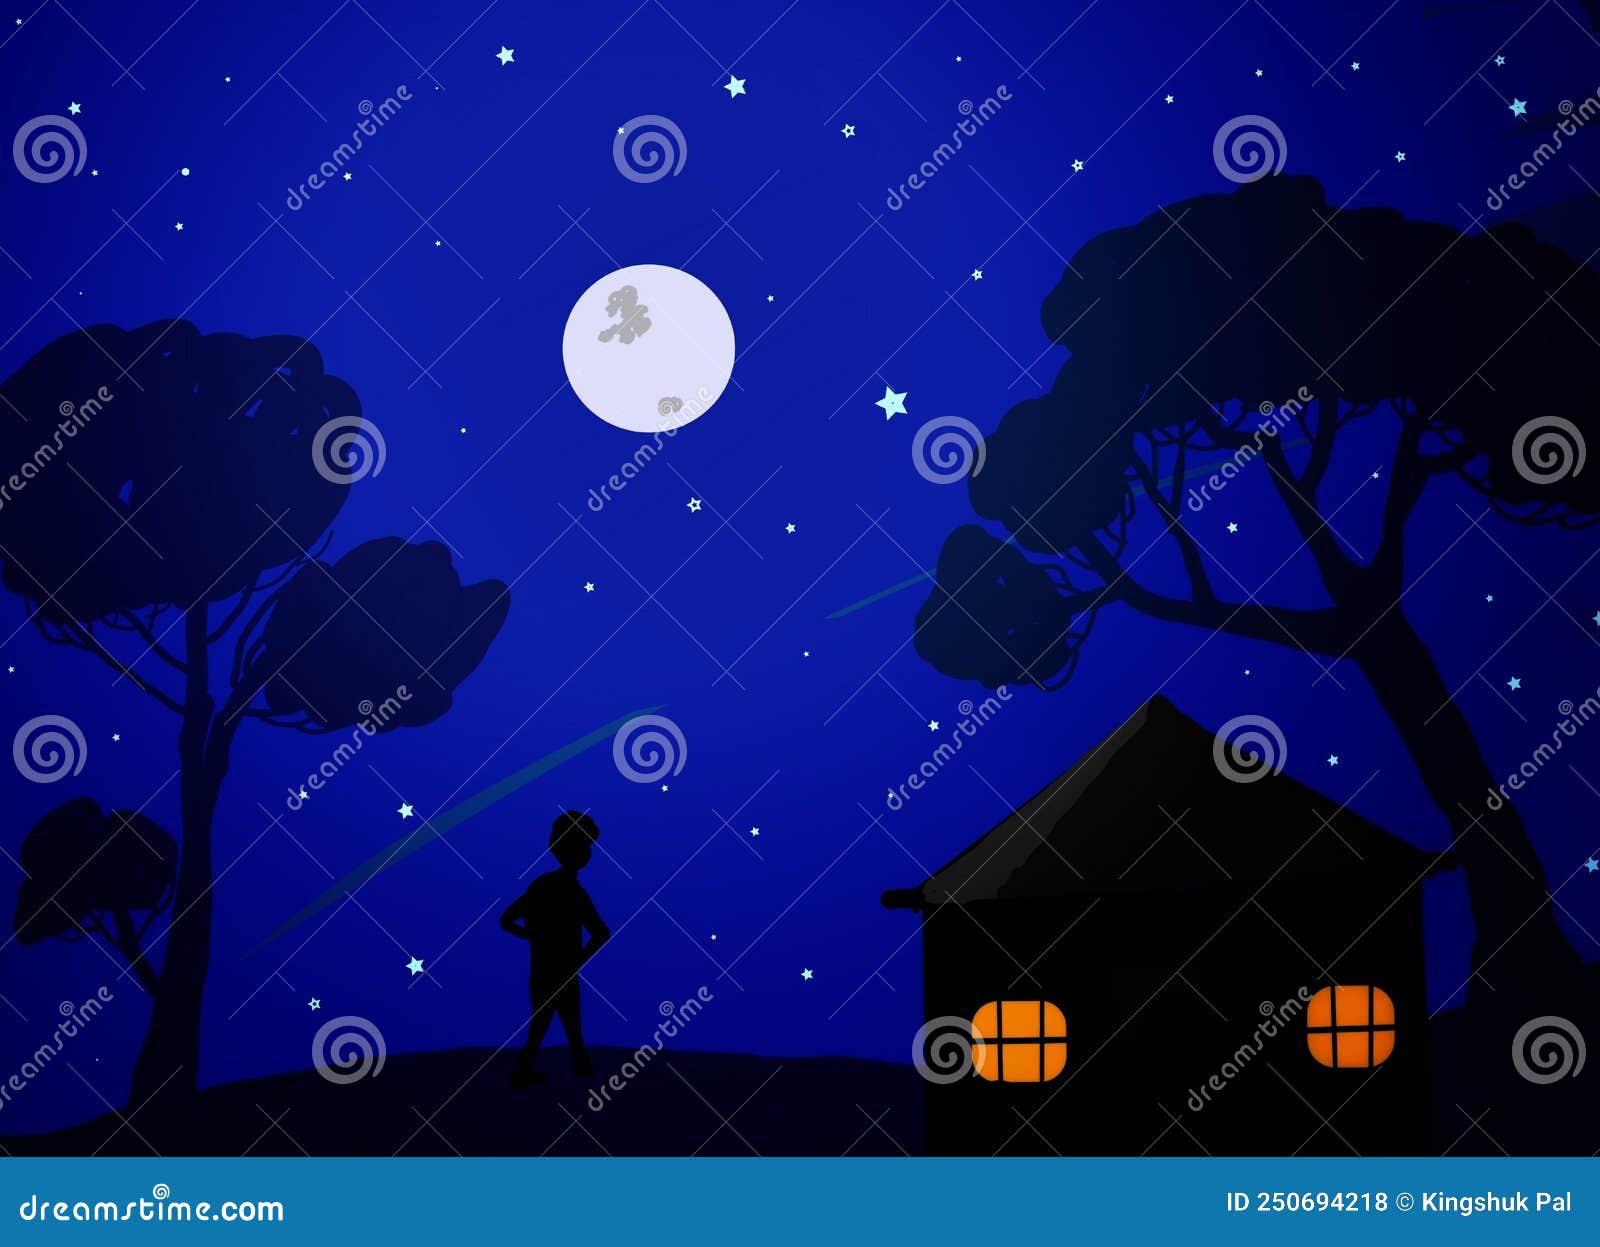 a peacefull night, with starry sky, full moon, tree, small house, and a silhouette man standing.